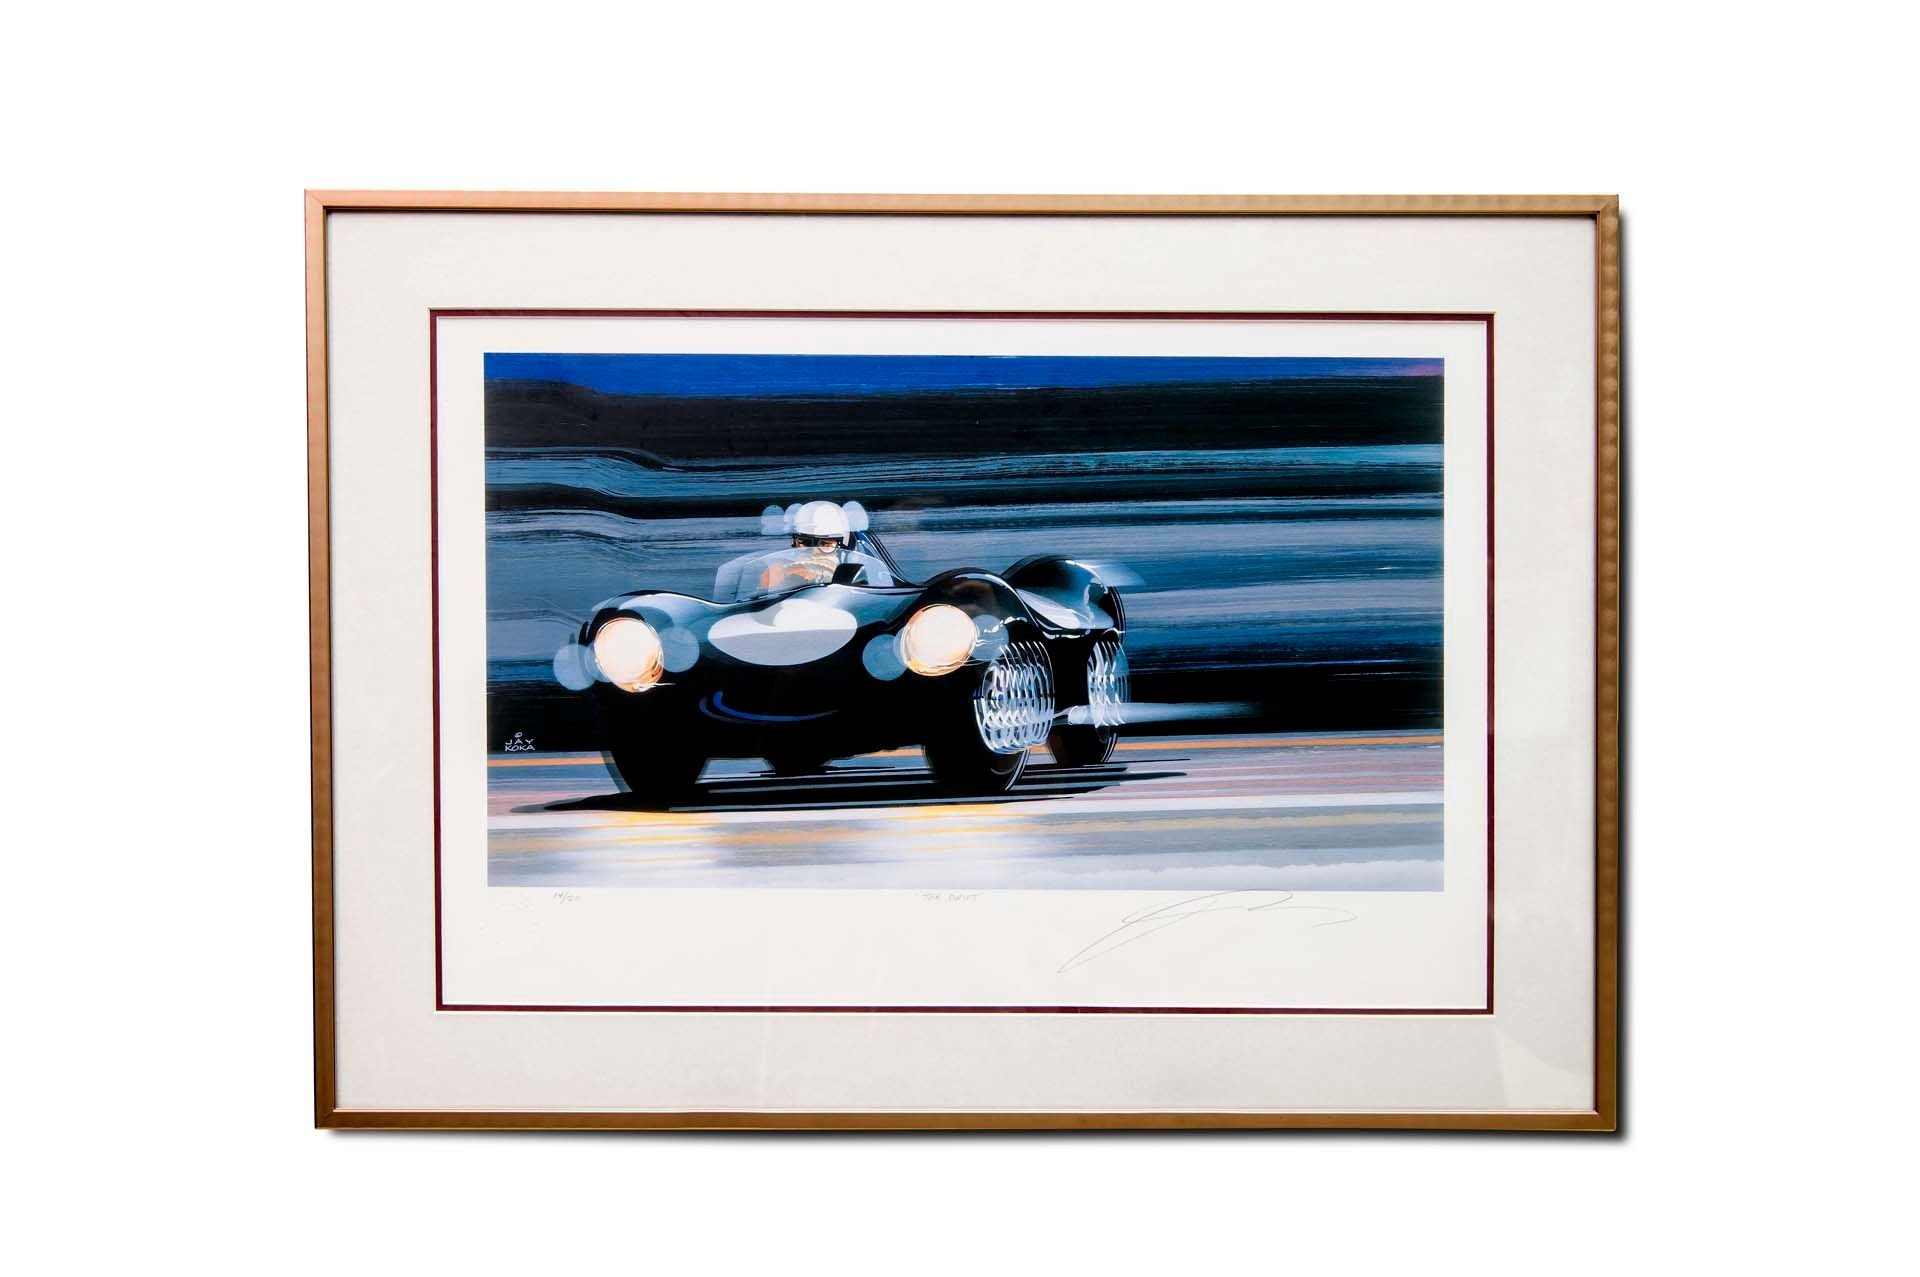 For Sale Framed Limited Edition Lithograph "The Drive" Jay Koka